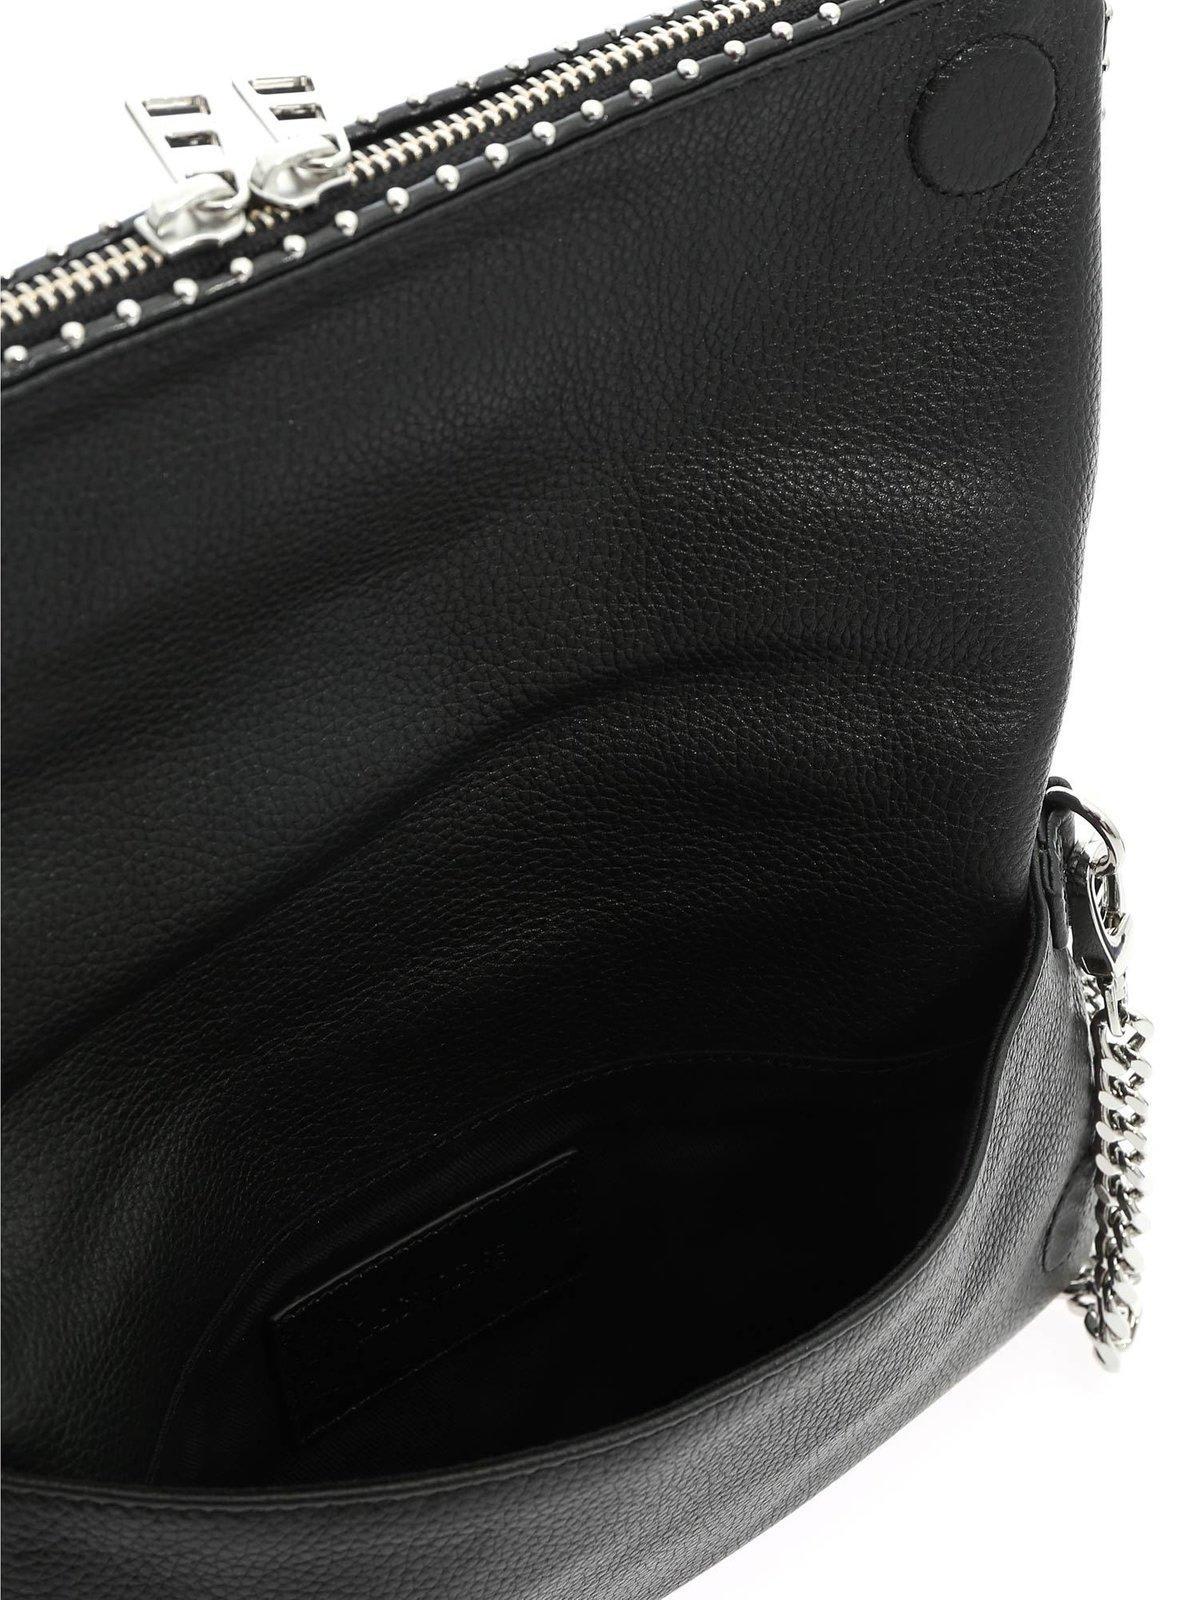 Zadig & Voltaire - SPOTTED: our iconic ROCK NANO BAG ! available